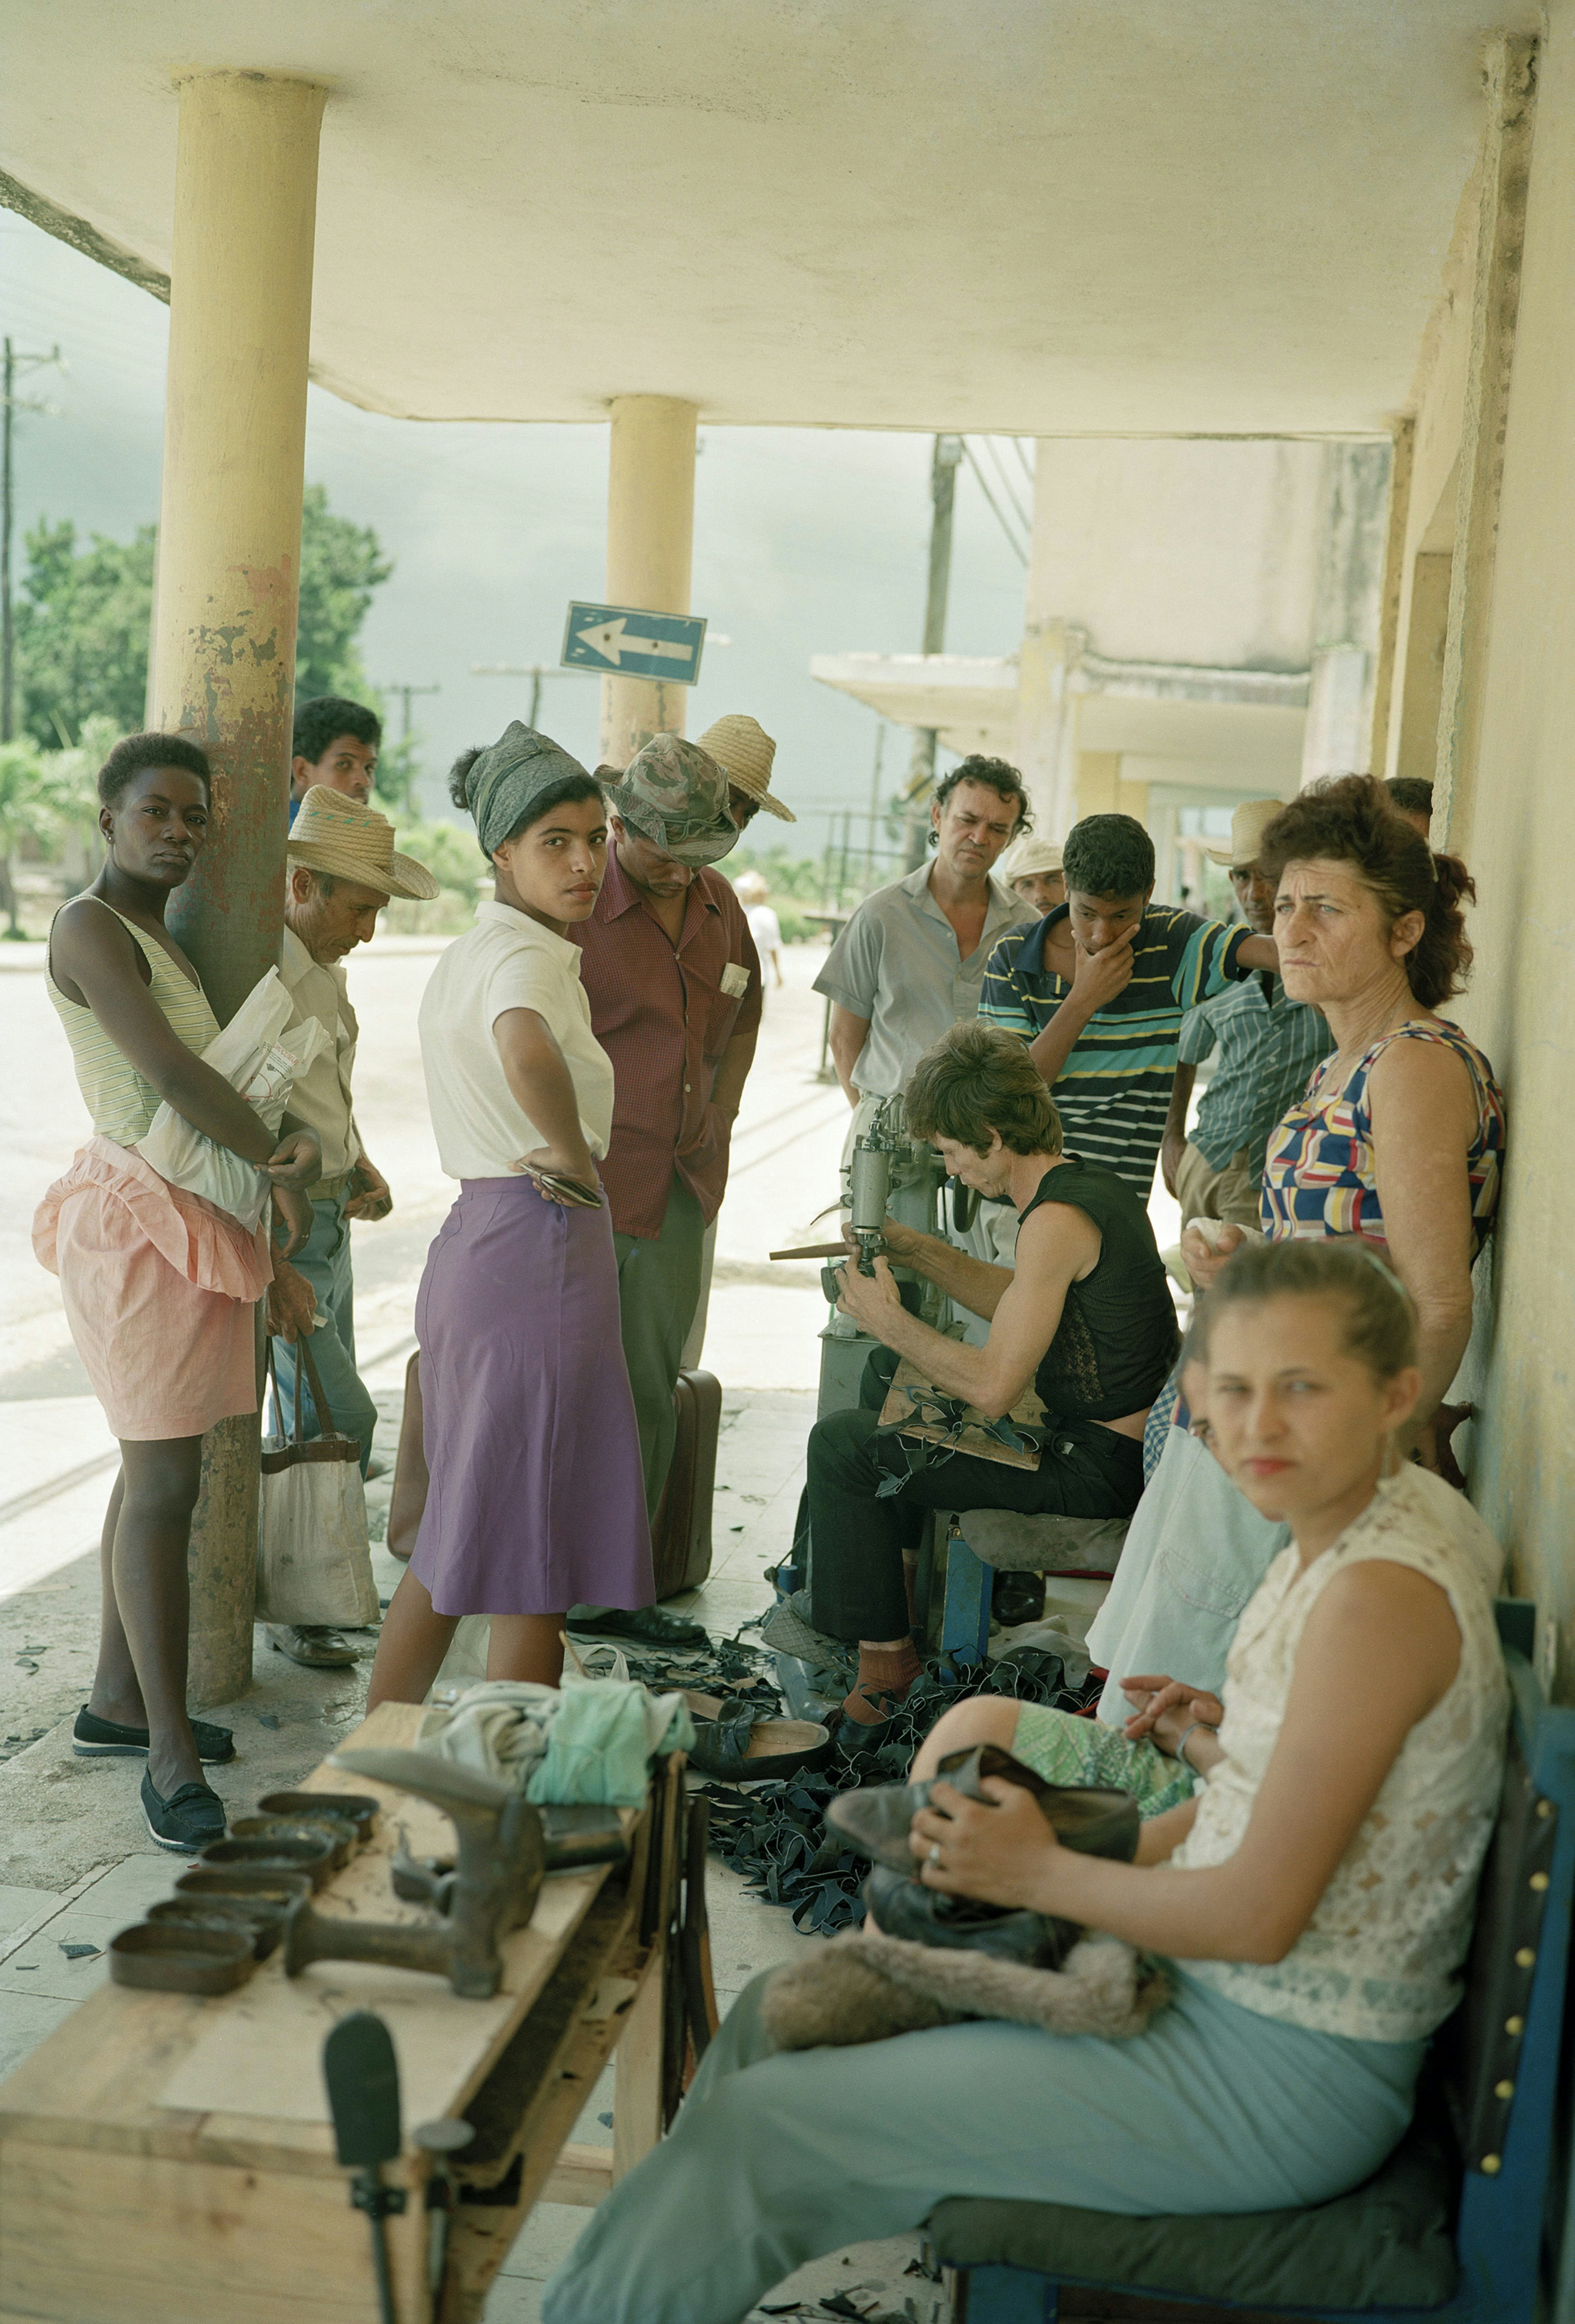 People wait in line for an outdoor shoe repair in the town of Cueto in the Holguin province. Taken on one of several cross-country trips to explore every major city and town on the 875-mile-long island.